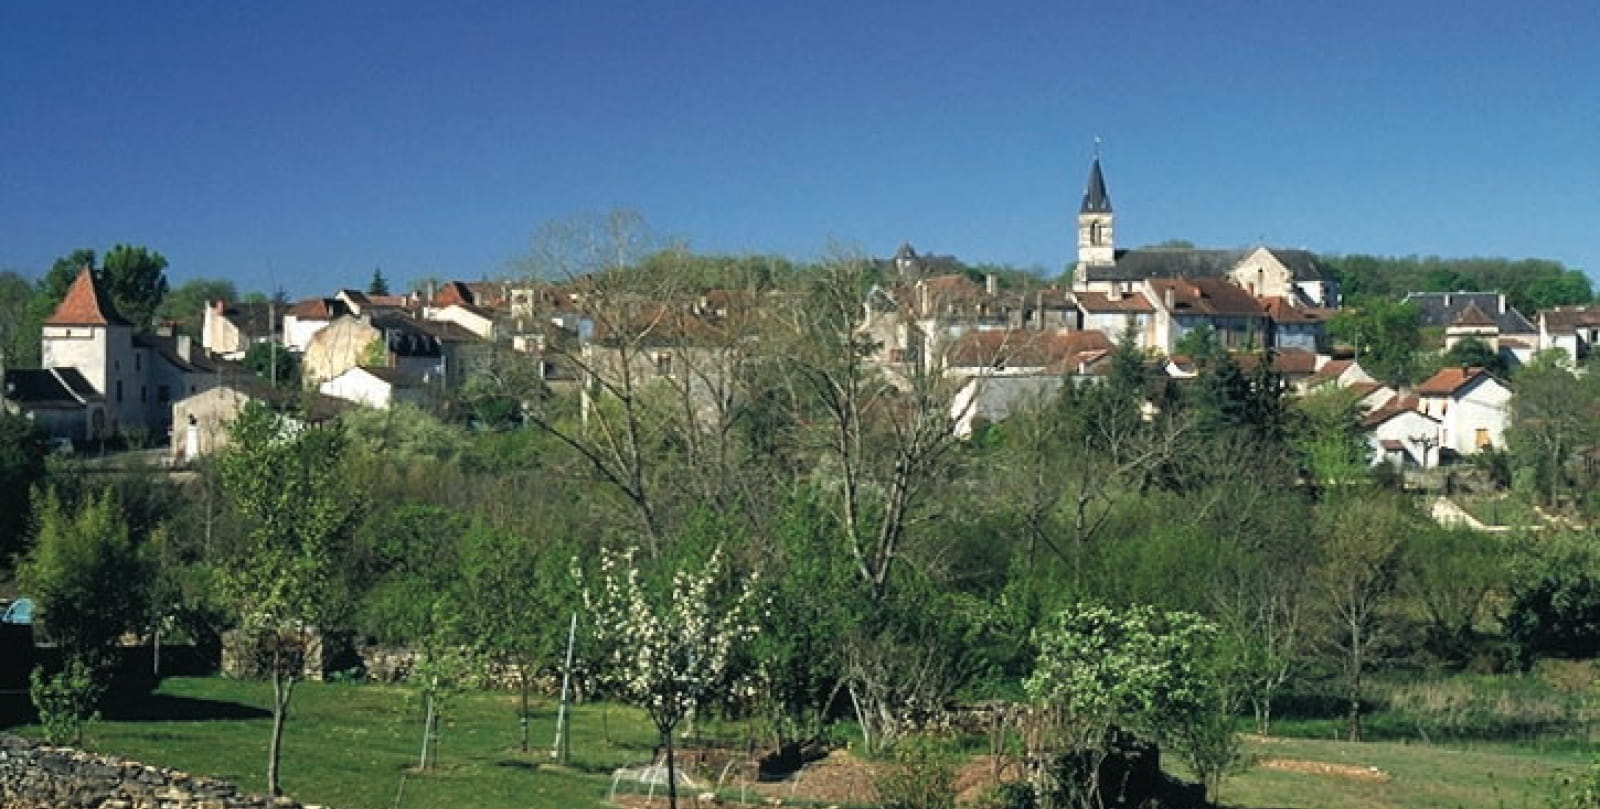 Limogne en Quercy: View of the Village